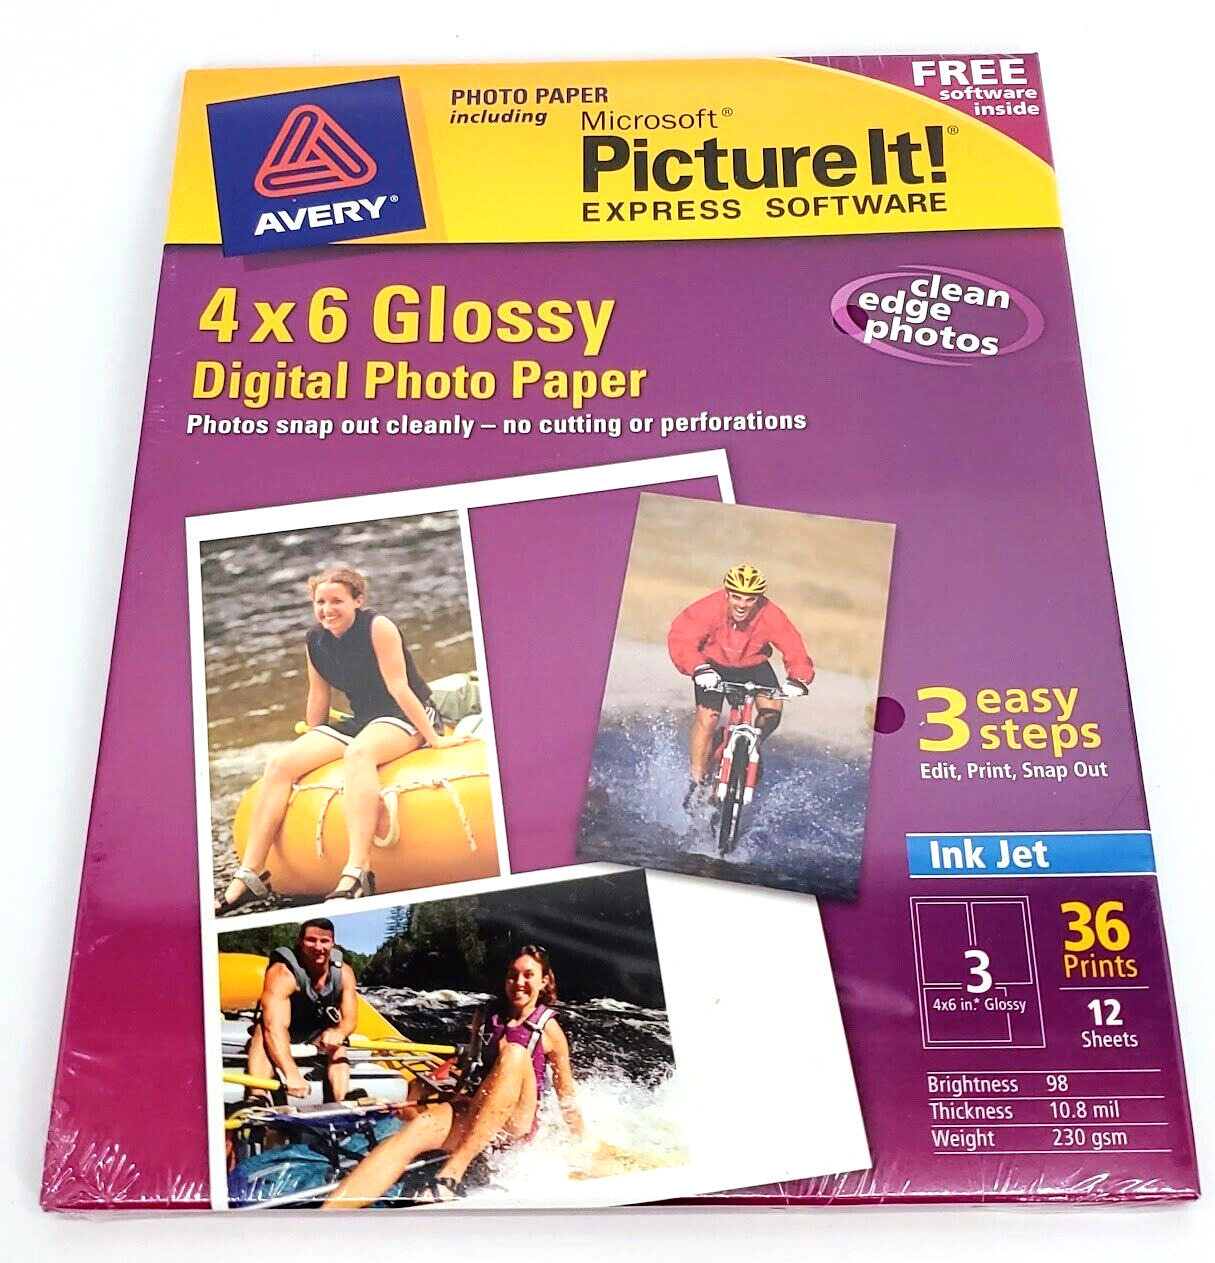 Avery 4x6 Glossy Digital Photo Paper Clean Edge Photo Free Software 12Sheets NEW